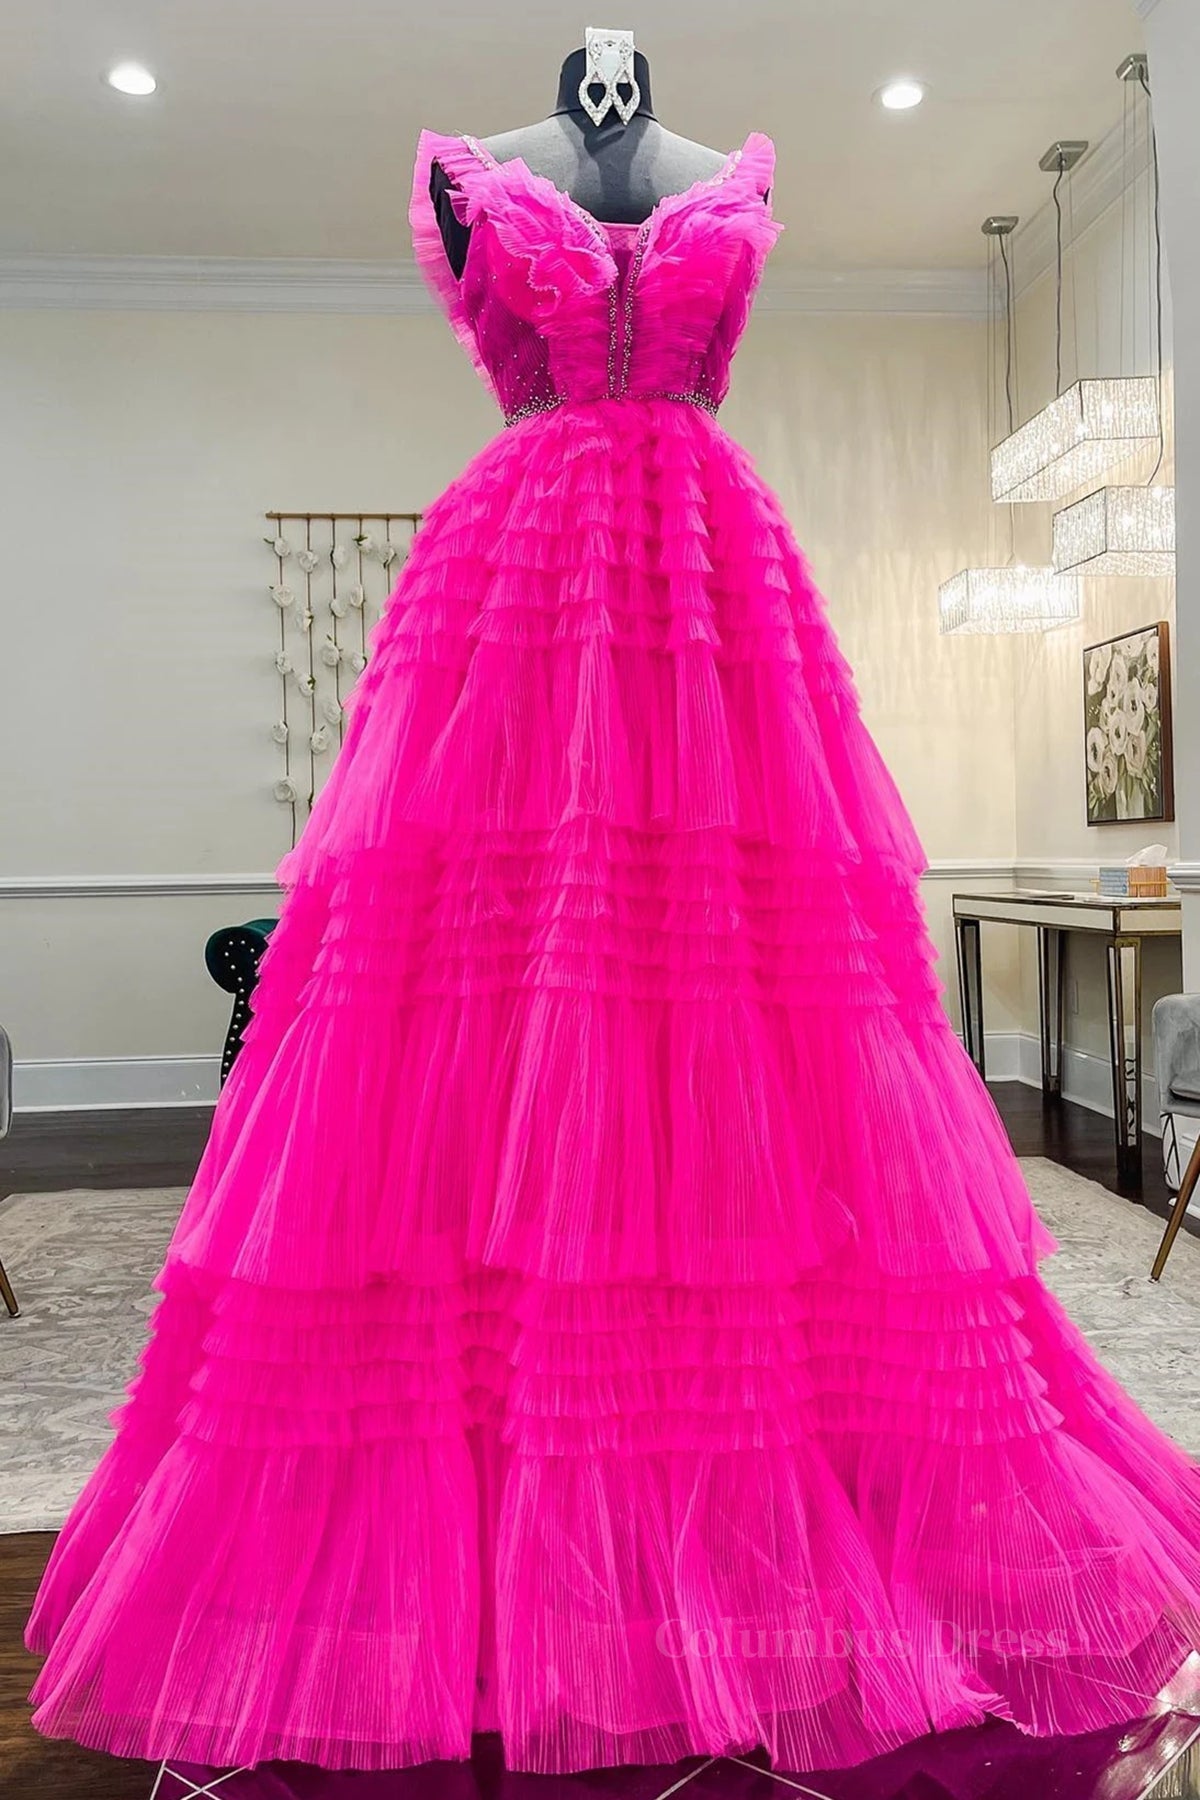 Hot Pink Tulle Long Corset Prom Dresses, Hot Pink Long Corset Formal Graduation Dresses outfit, Formal Dress For Wedding Party